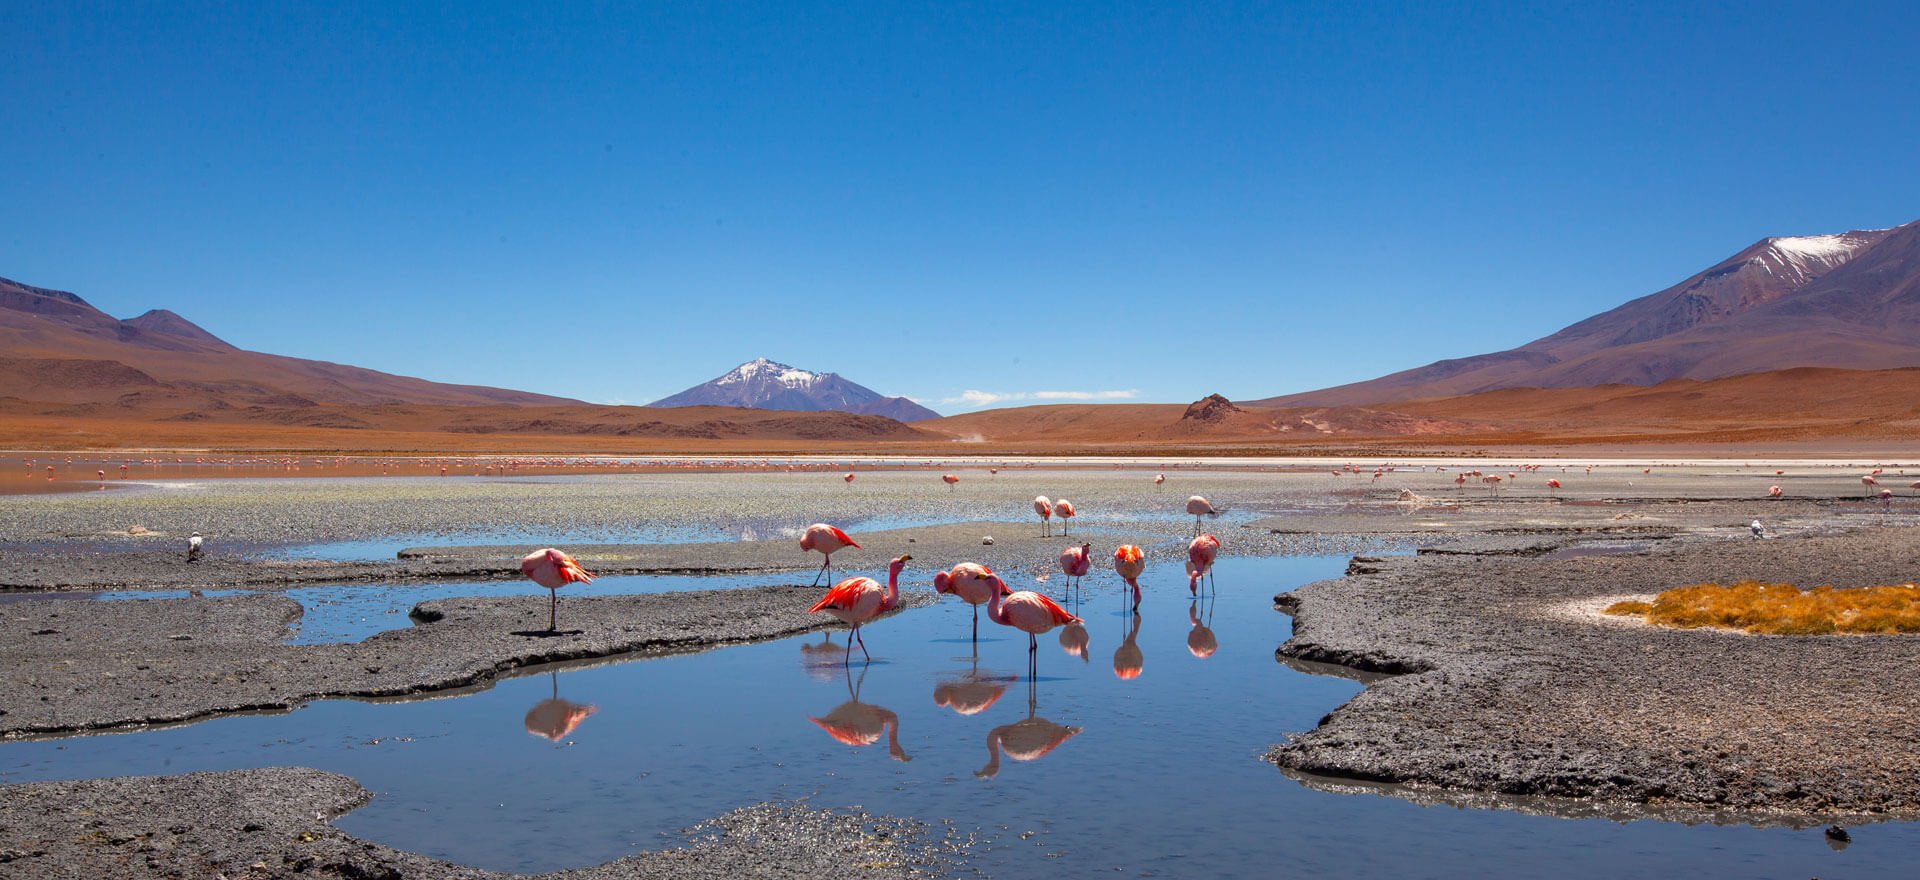 Native Eye Travel home page - Latin America - flamingos in wilderness landscape